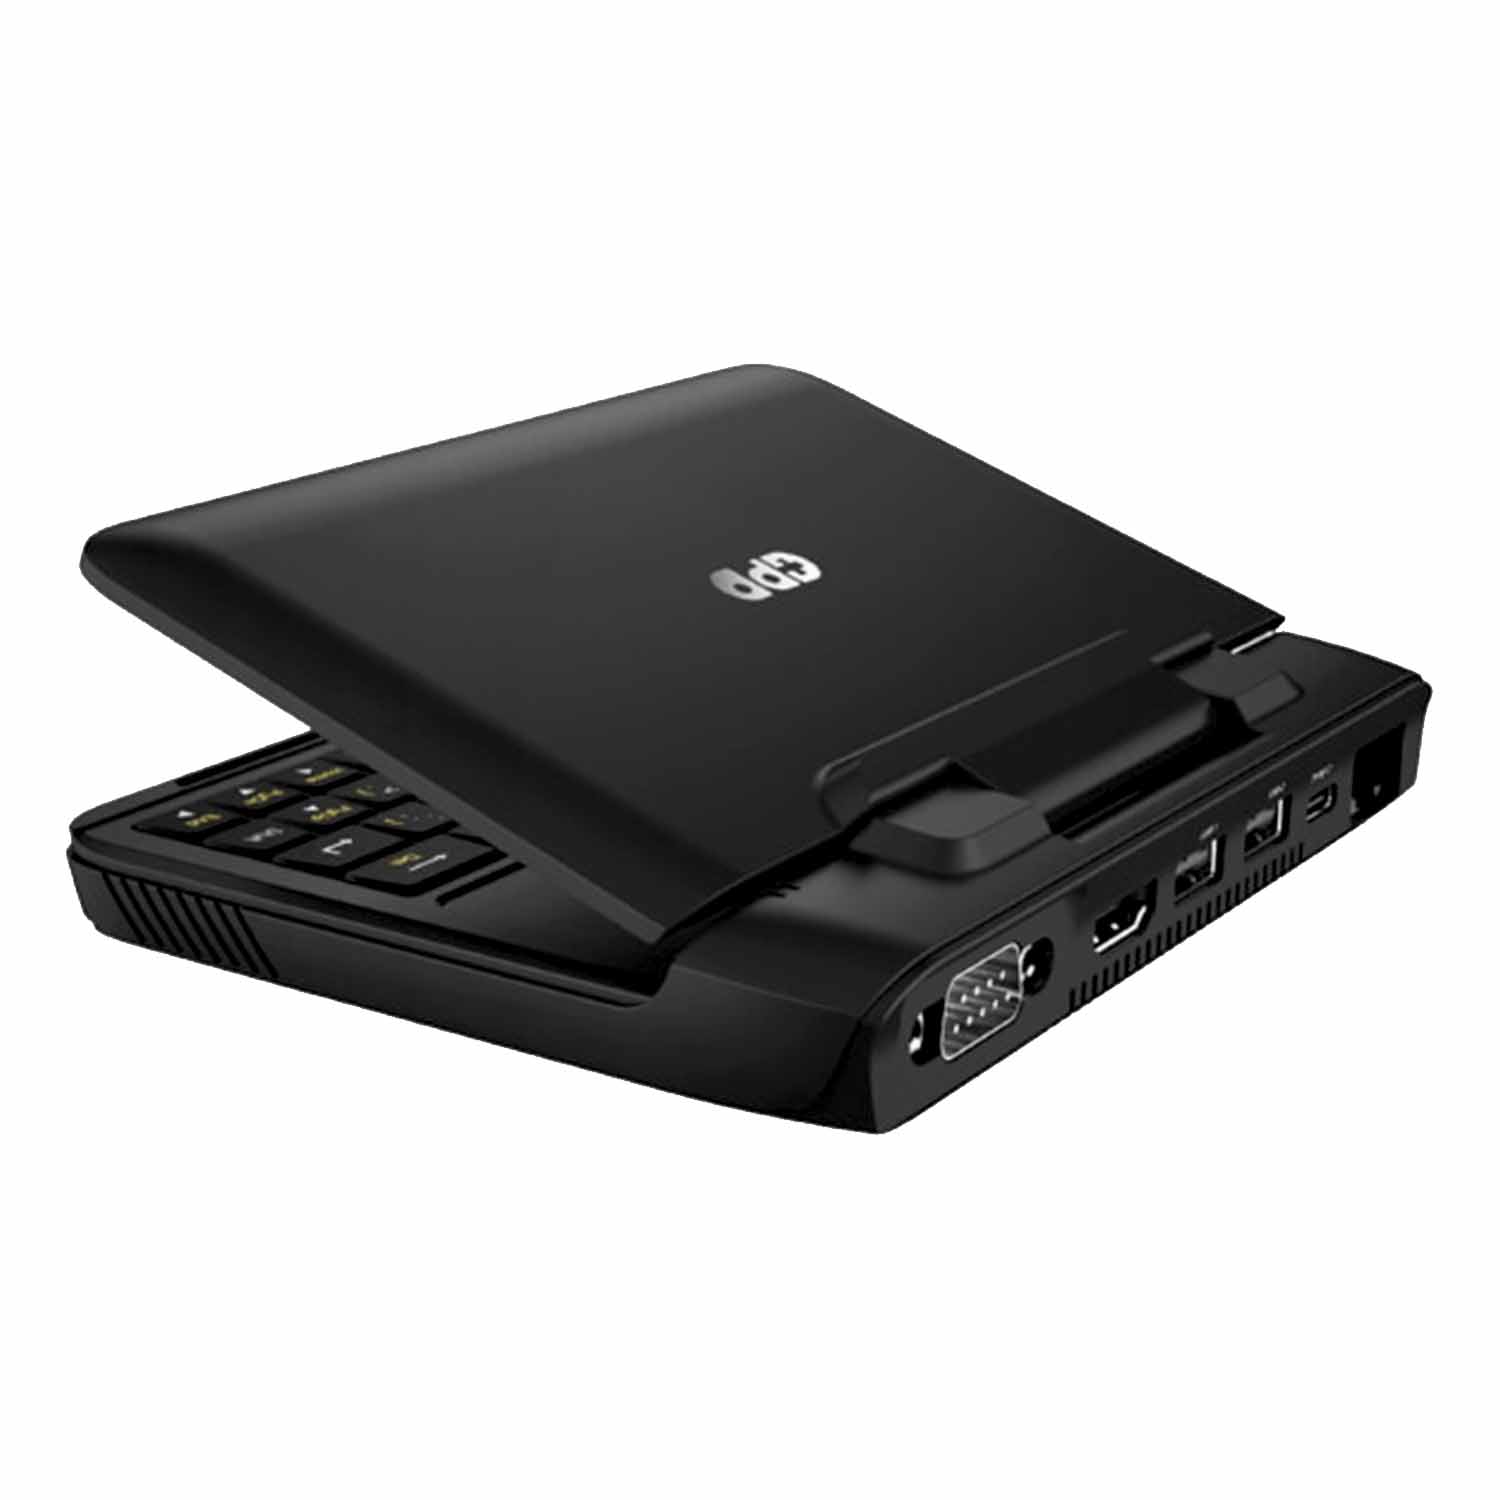 GPD Micro PC industry Mini Laptop with RS232